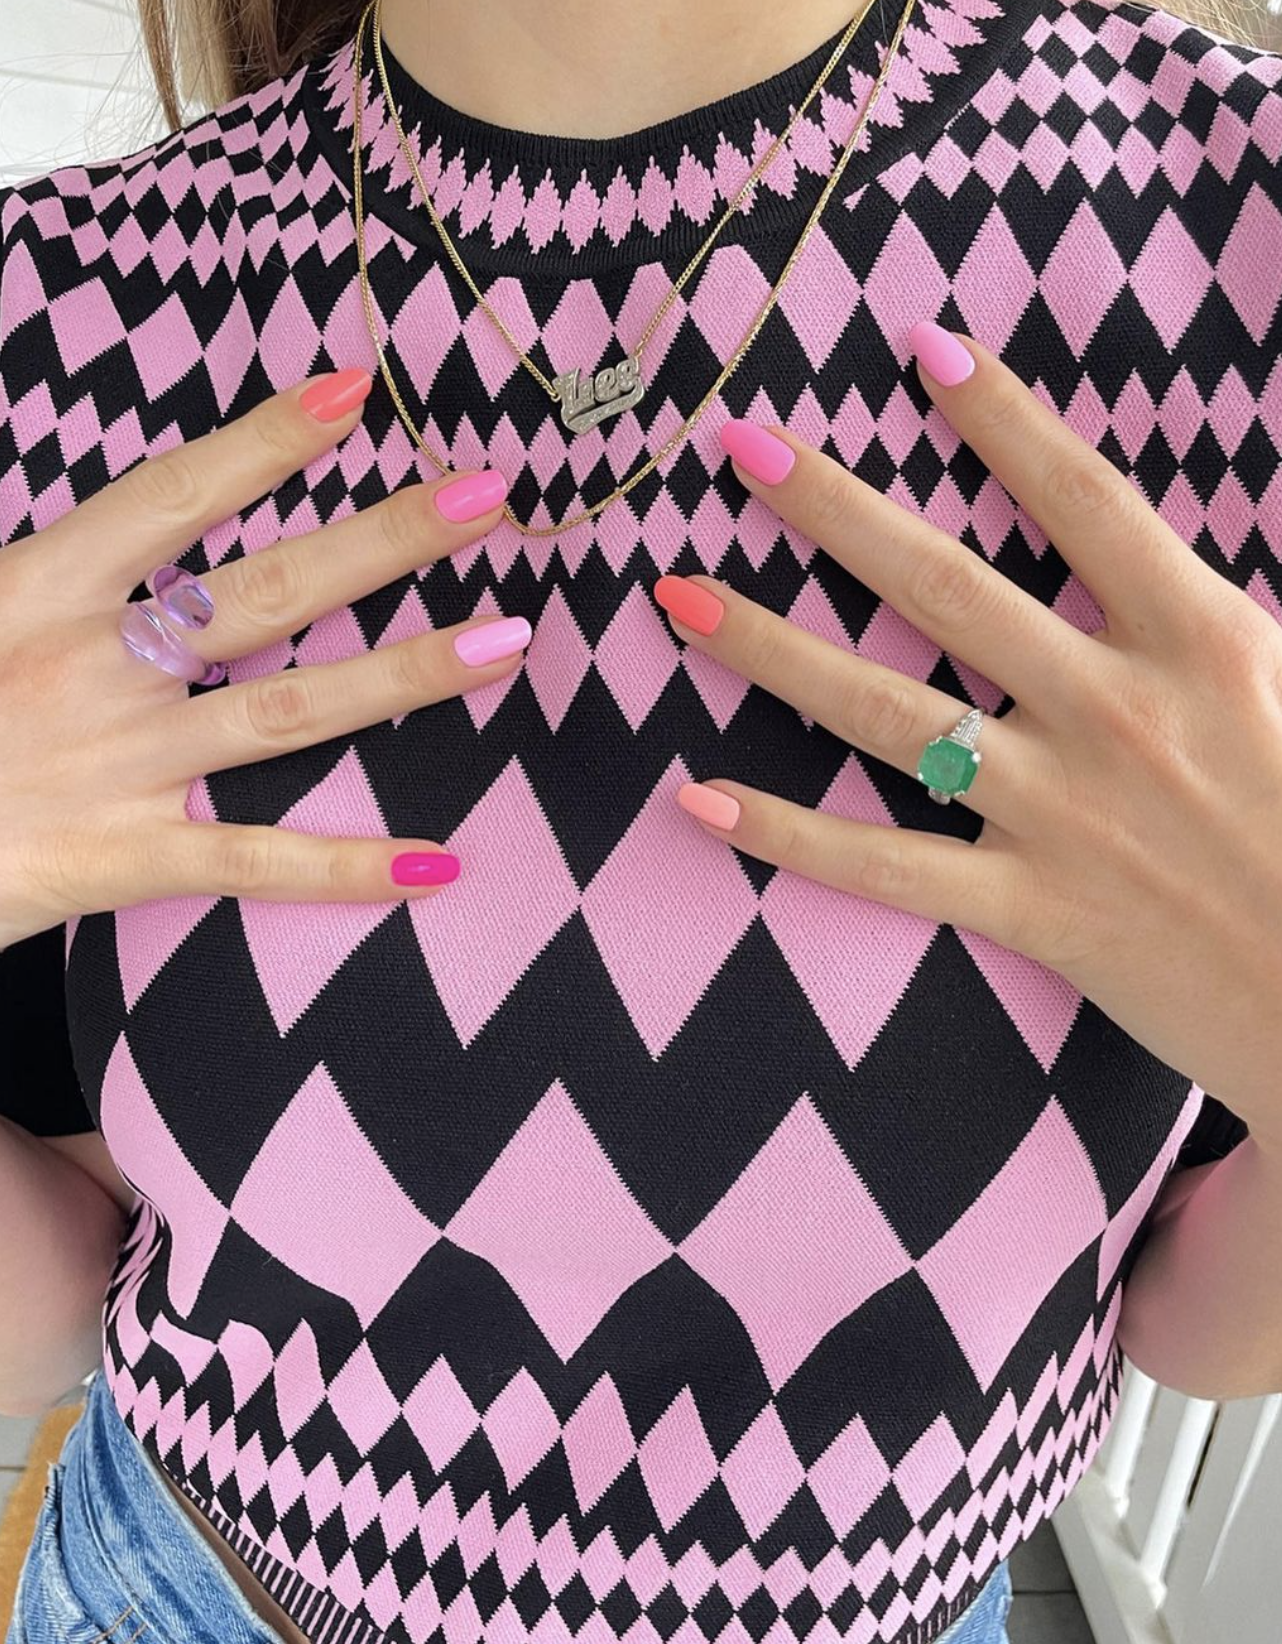 34 pink nail designs that'll give you all the inspo